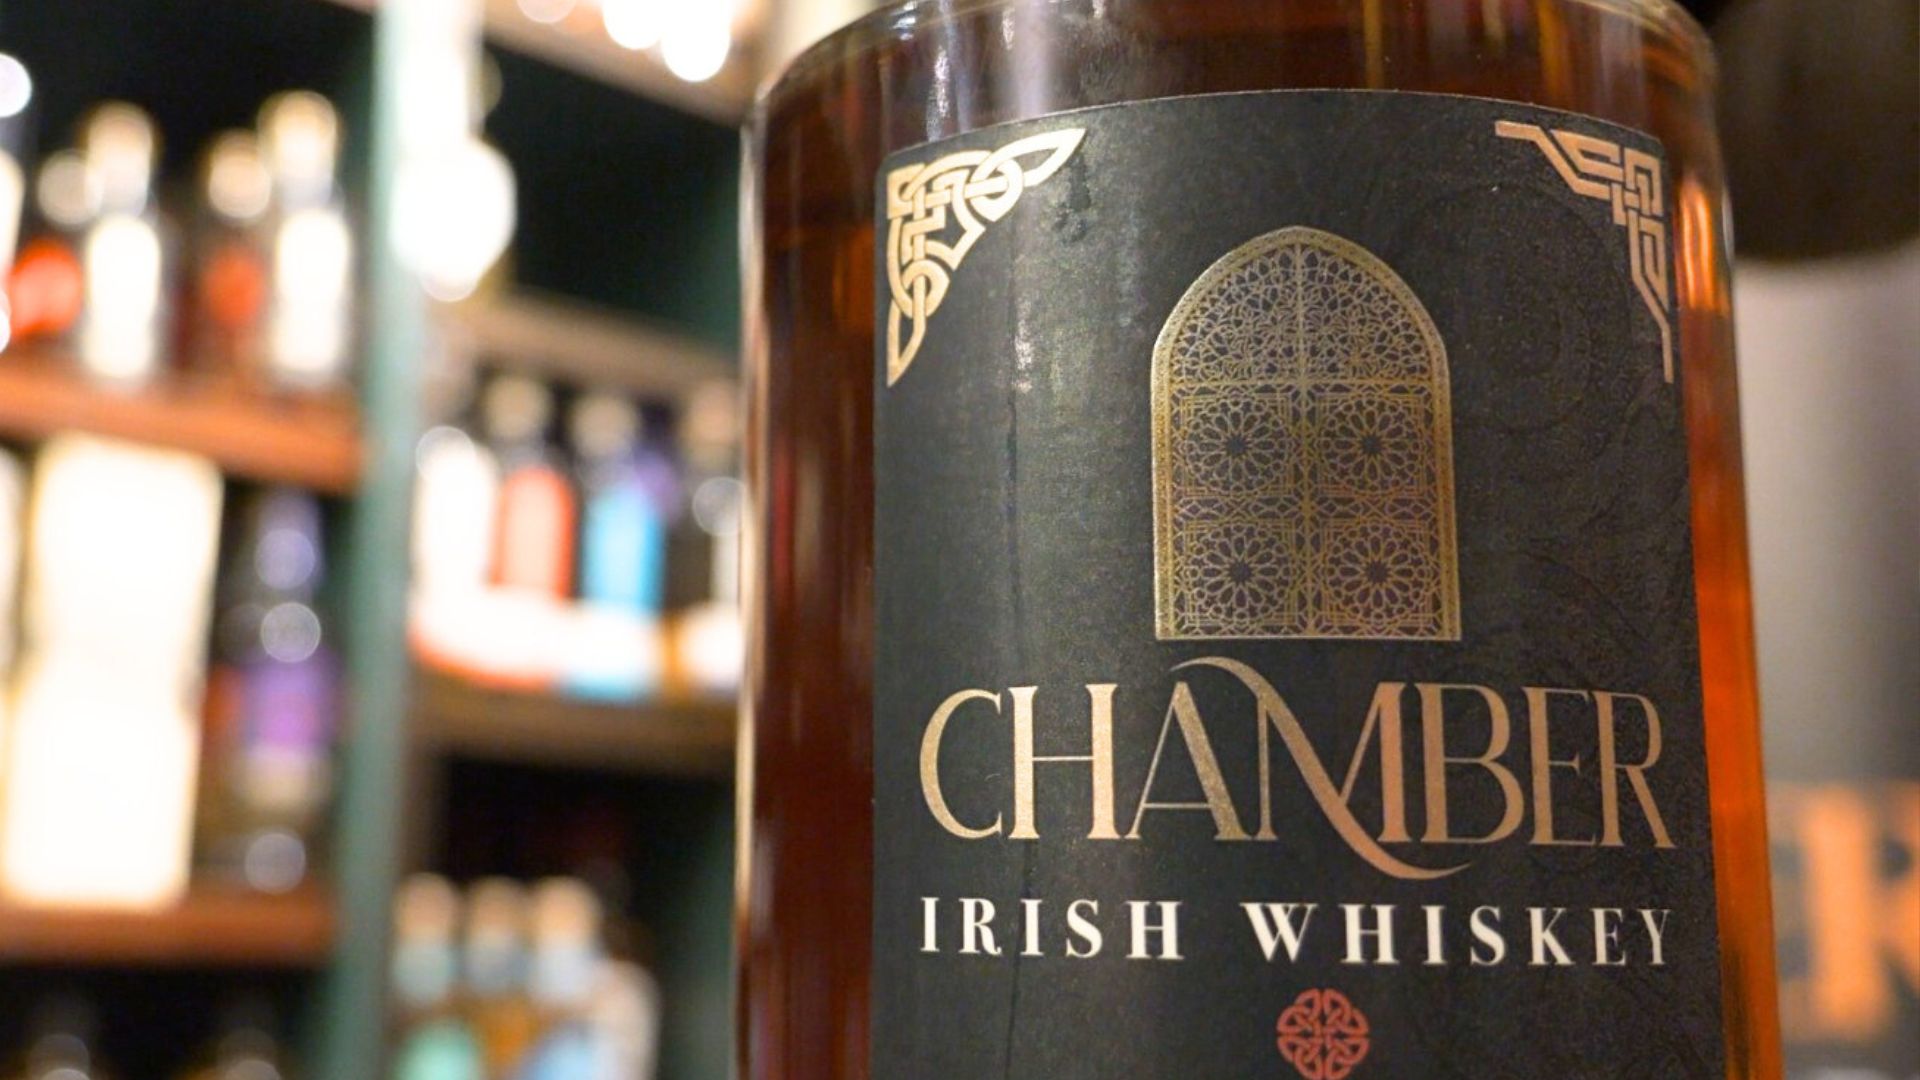 Chamber is one of the biggest Irish whiskey brands in China. /CGTN